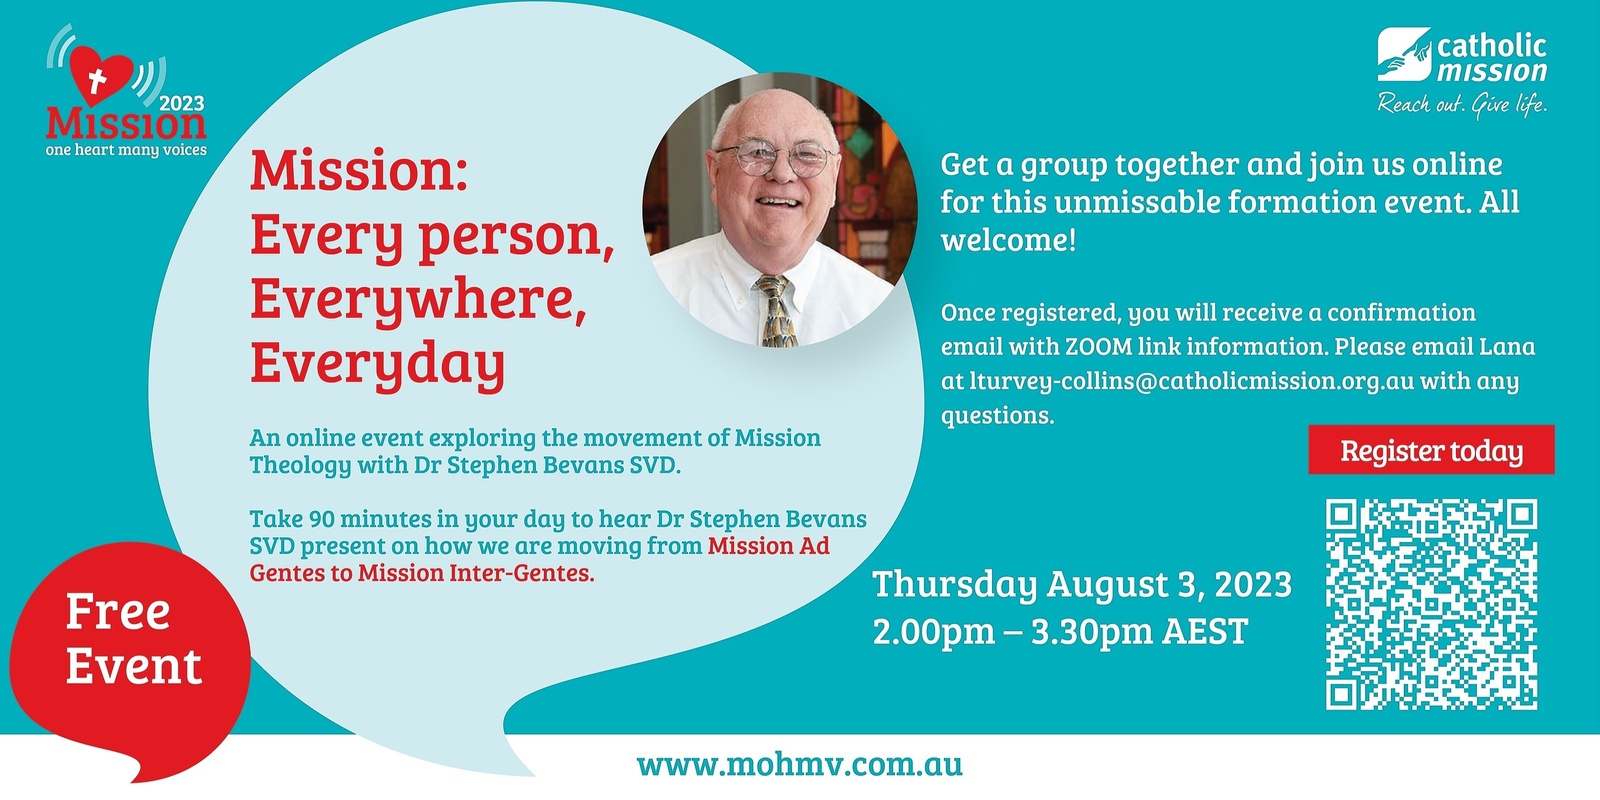 Banner image for Mission: Every person, Everywhere, Everyday – An online event exploring the movement of Mission Theology with Dr Stephen Bevans SVD